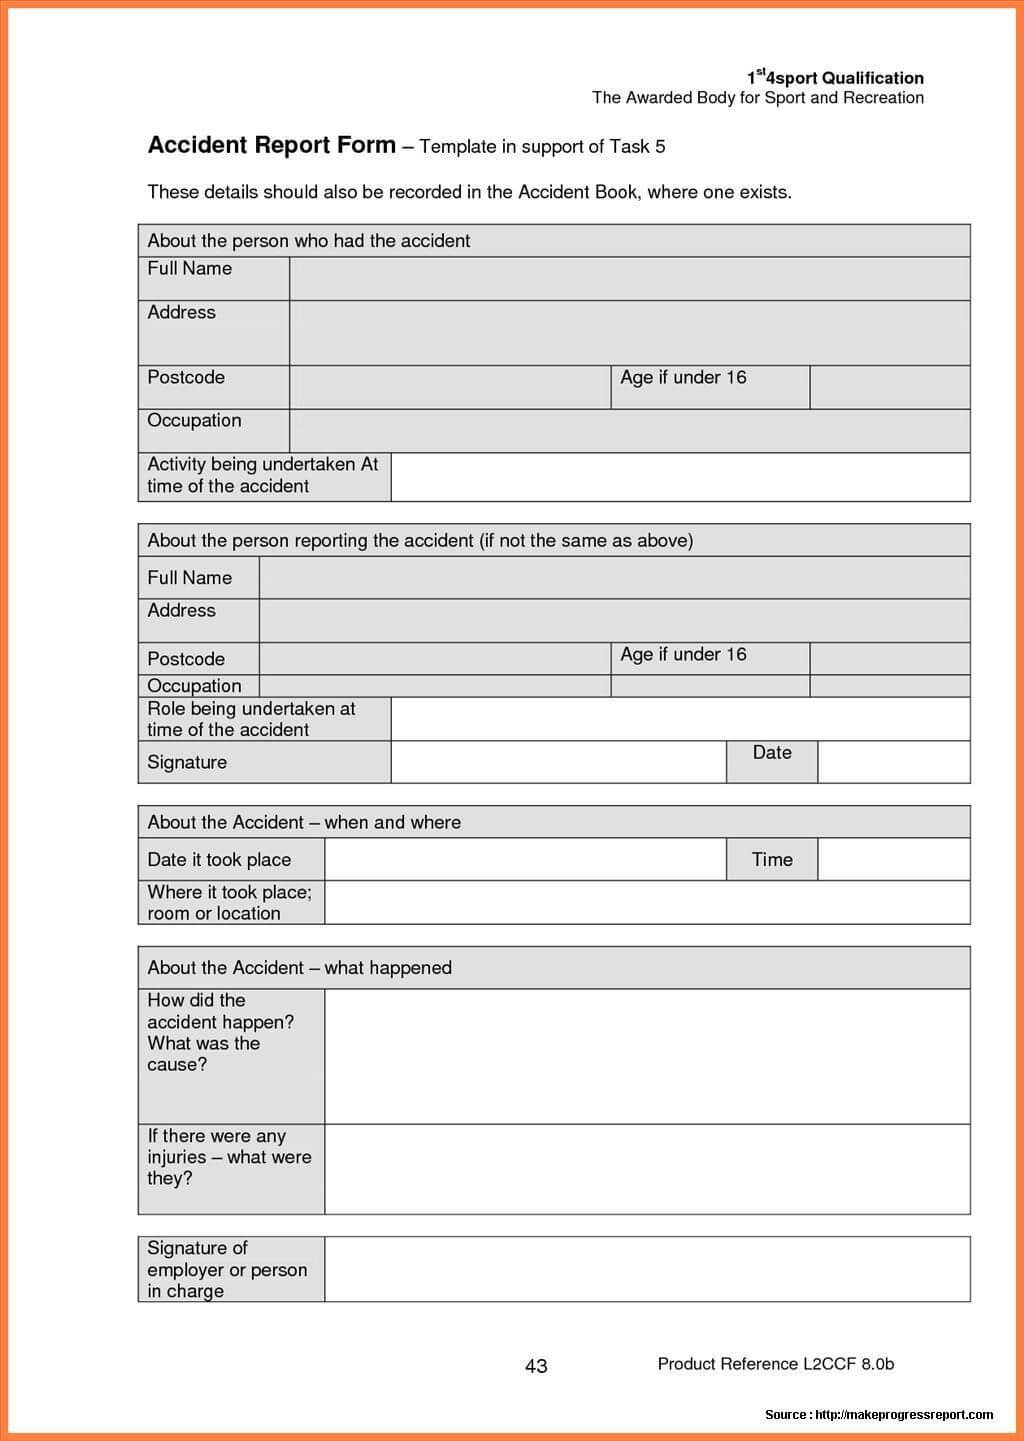 Construction Accident Report Form Sample | Work | Report Throughout Construction Accident Report Template